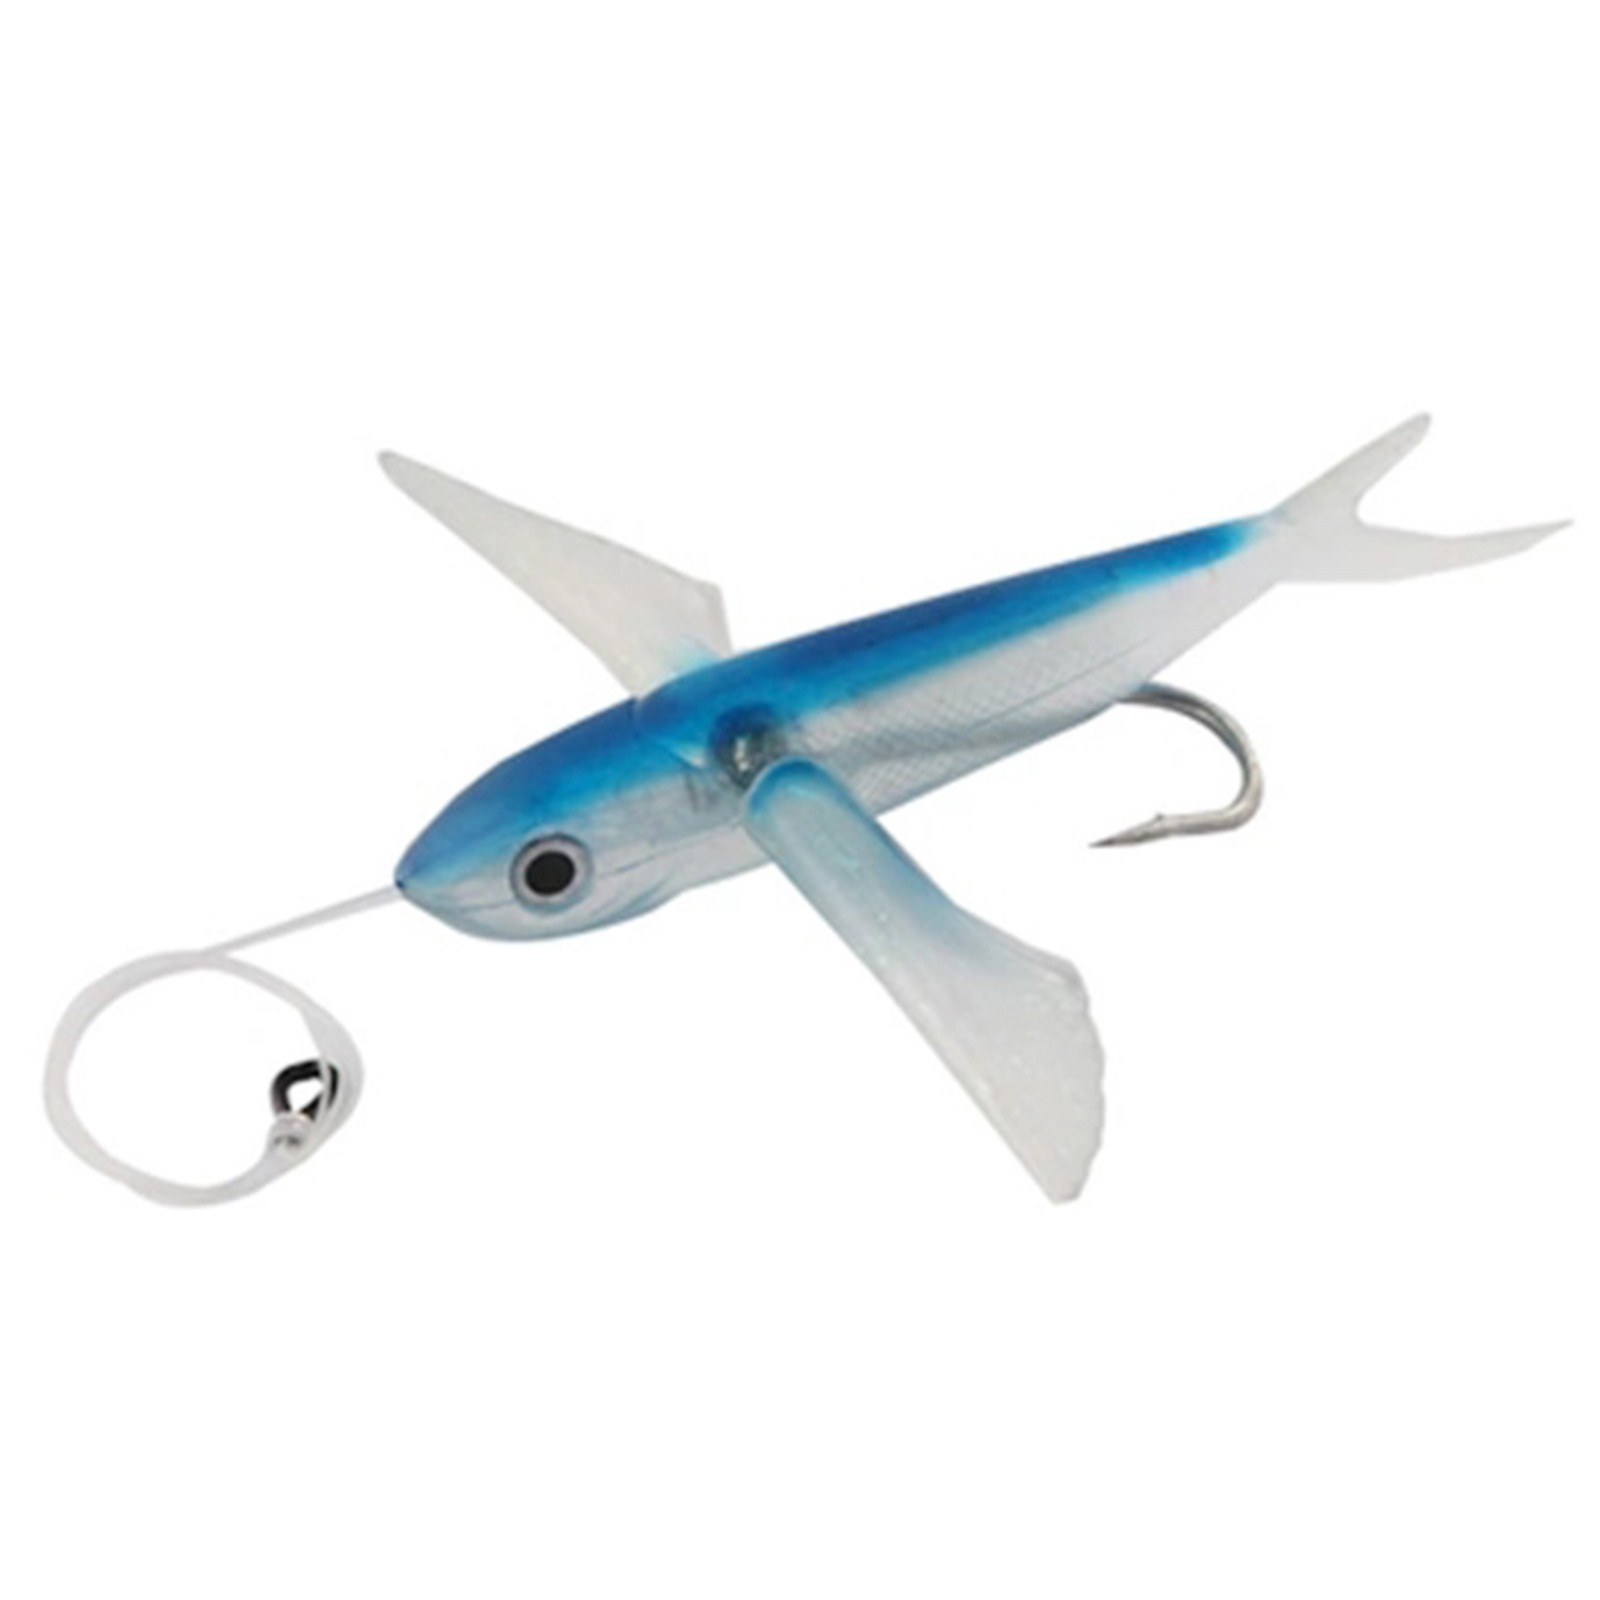 Artificial Bait Fishing Lure 3D Simulation Flying Fish Design PVC Material